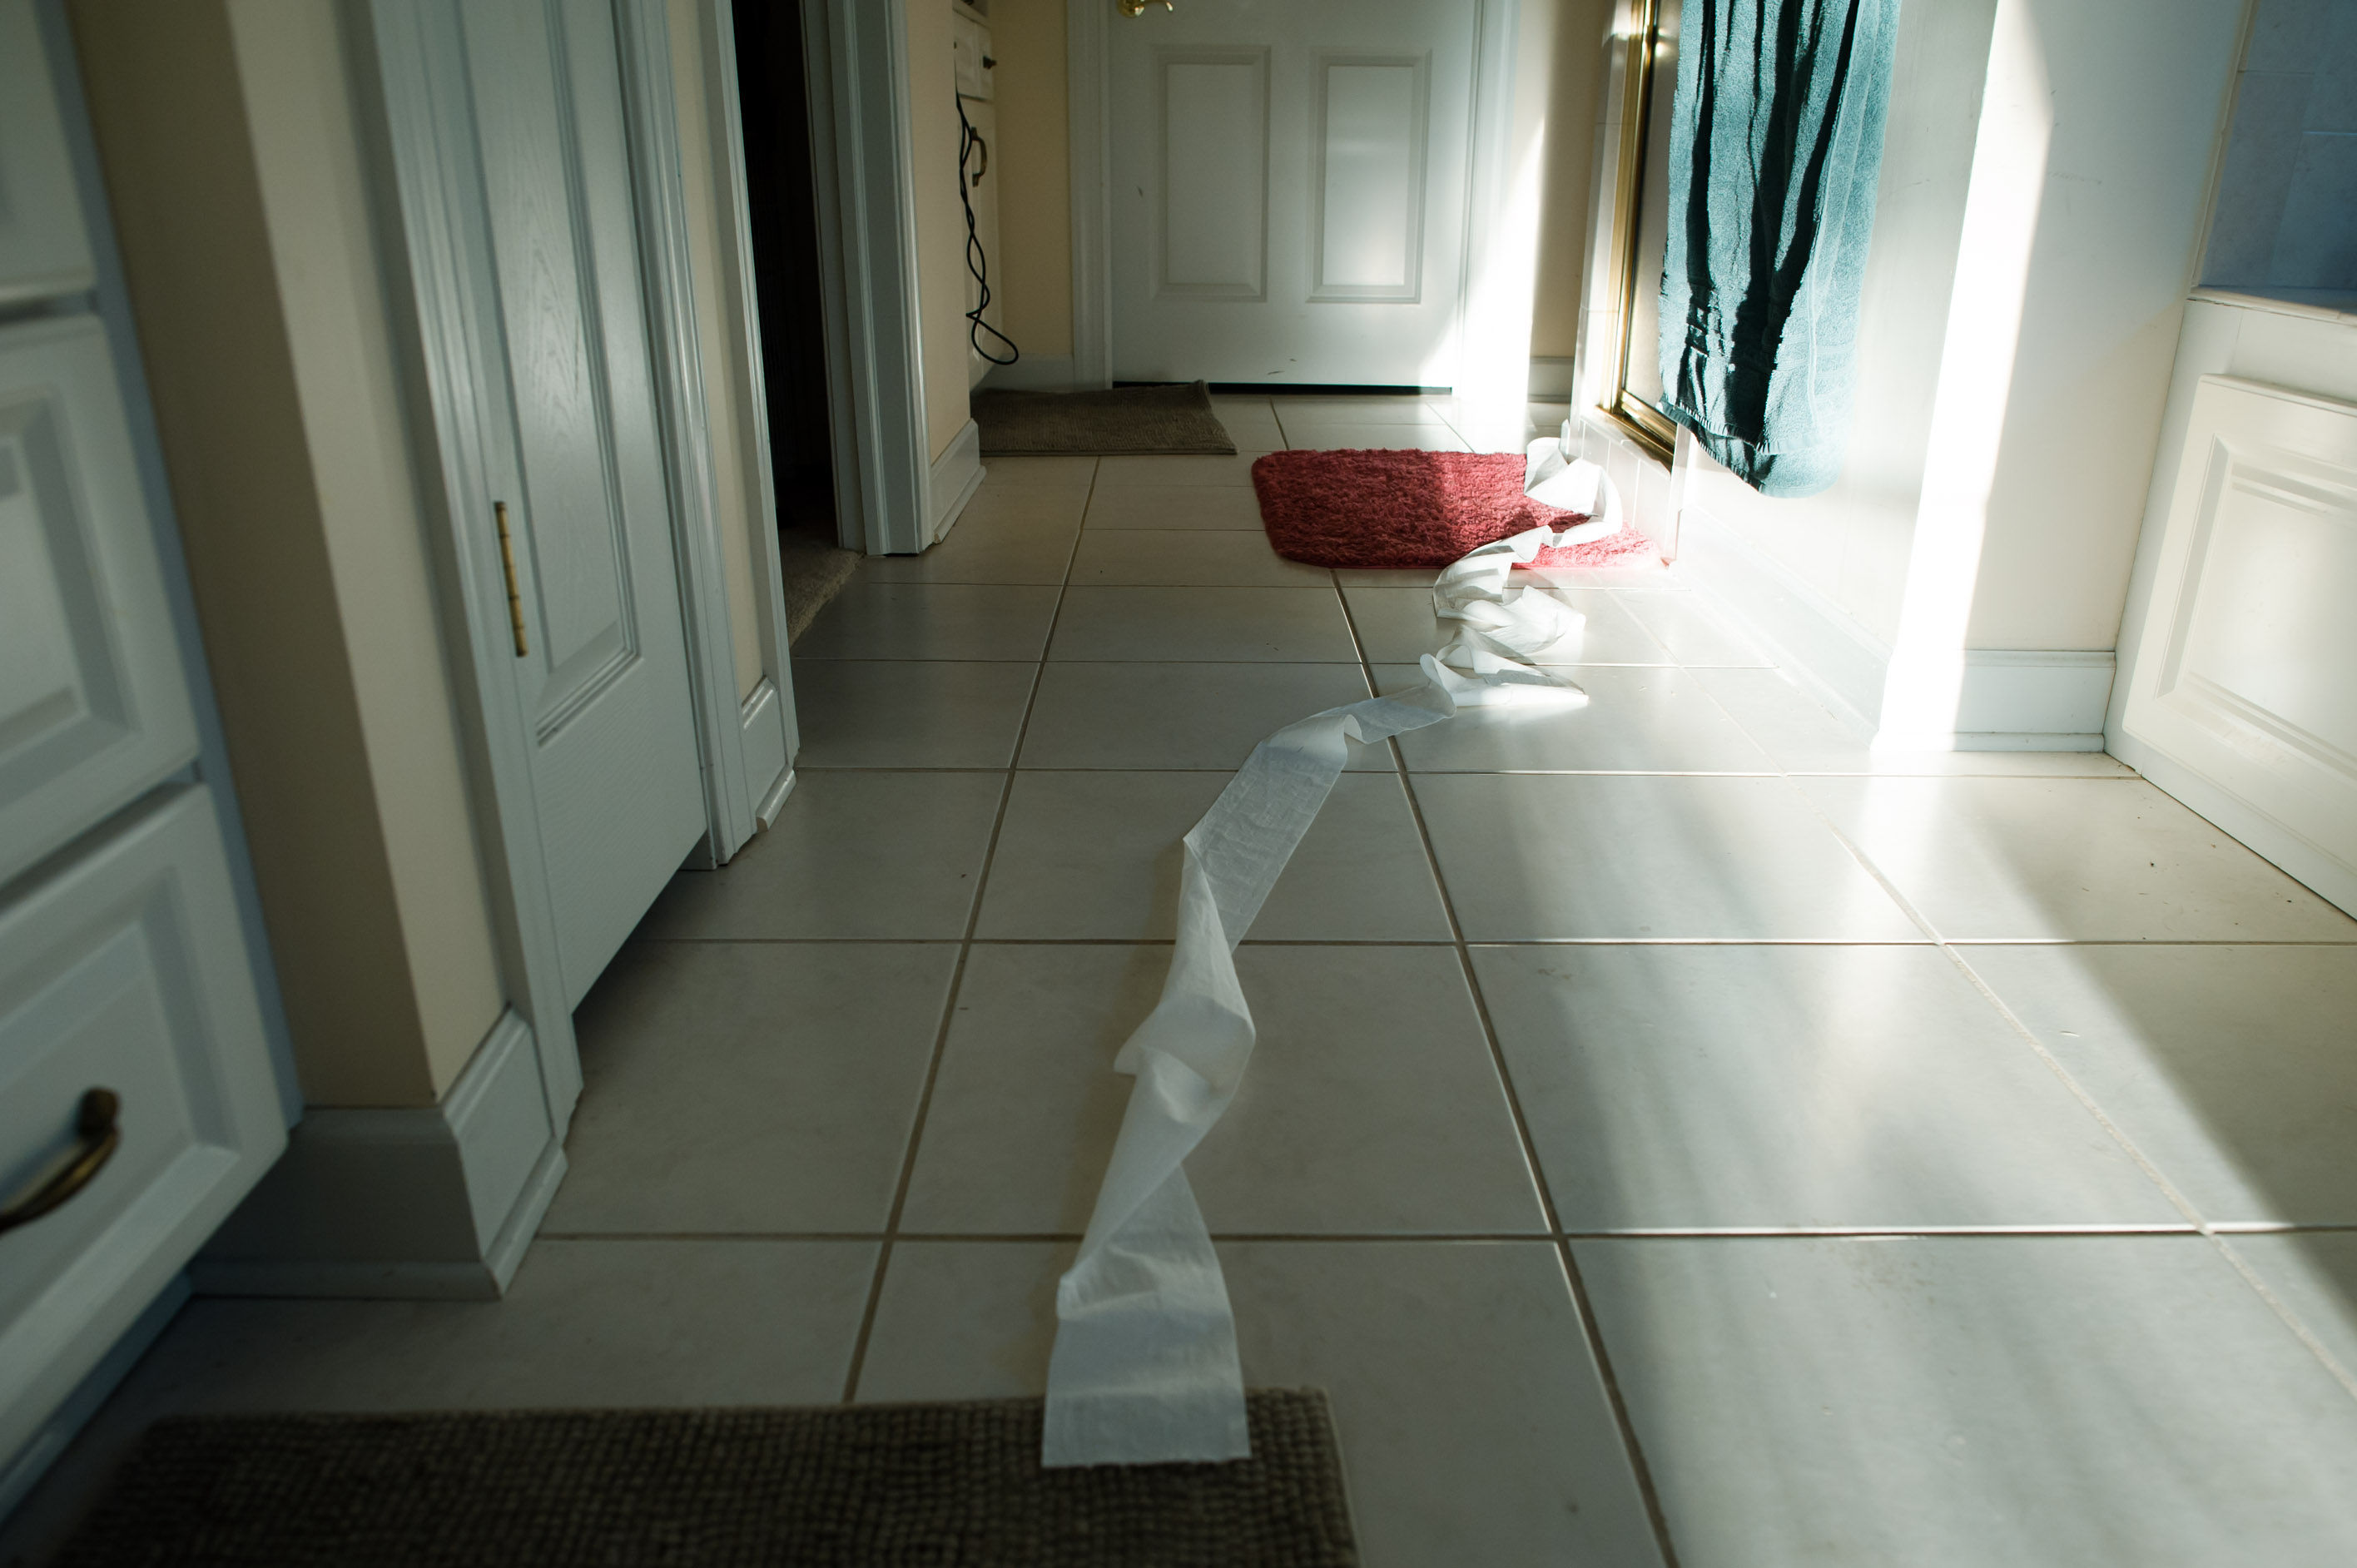 toilet paper unrolled on floor - documentary family photography